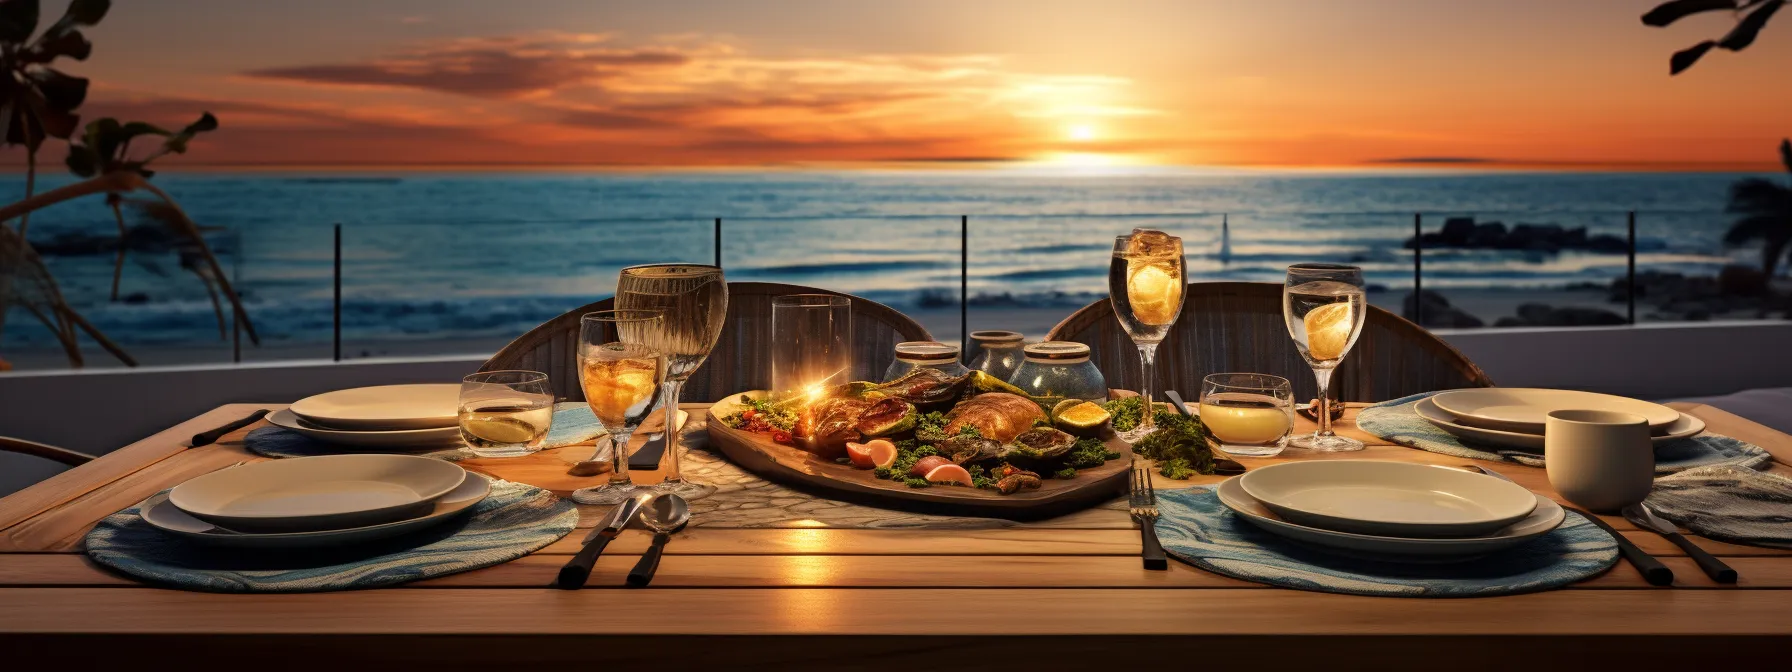 A table set for dinner on the beach at sunset at Secrets Resorts.